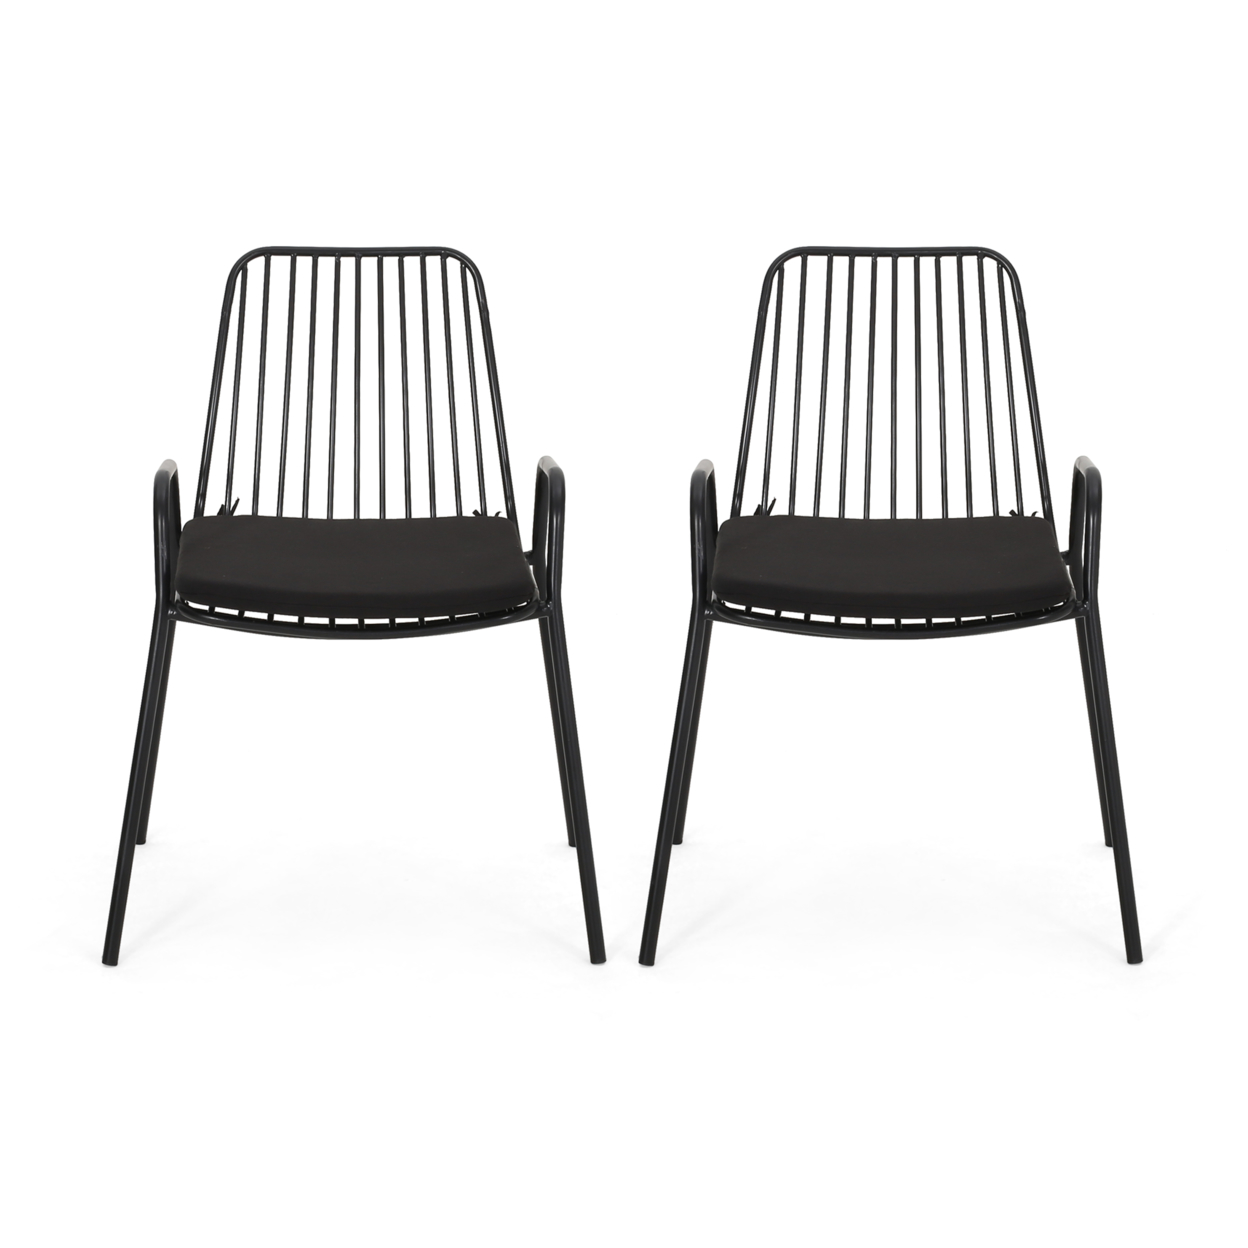 Kaitlyn Outdoor Modern Iron Club Chair With Cushion (Set Of 2) - Matte Black + Black